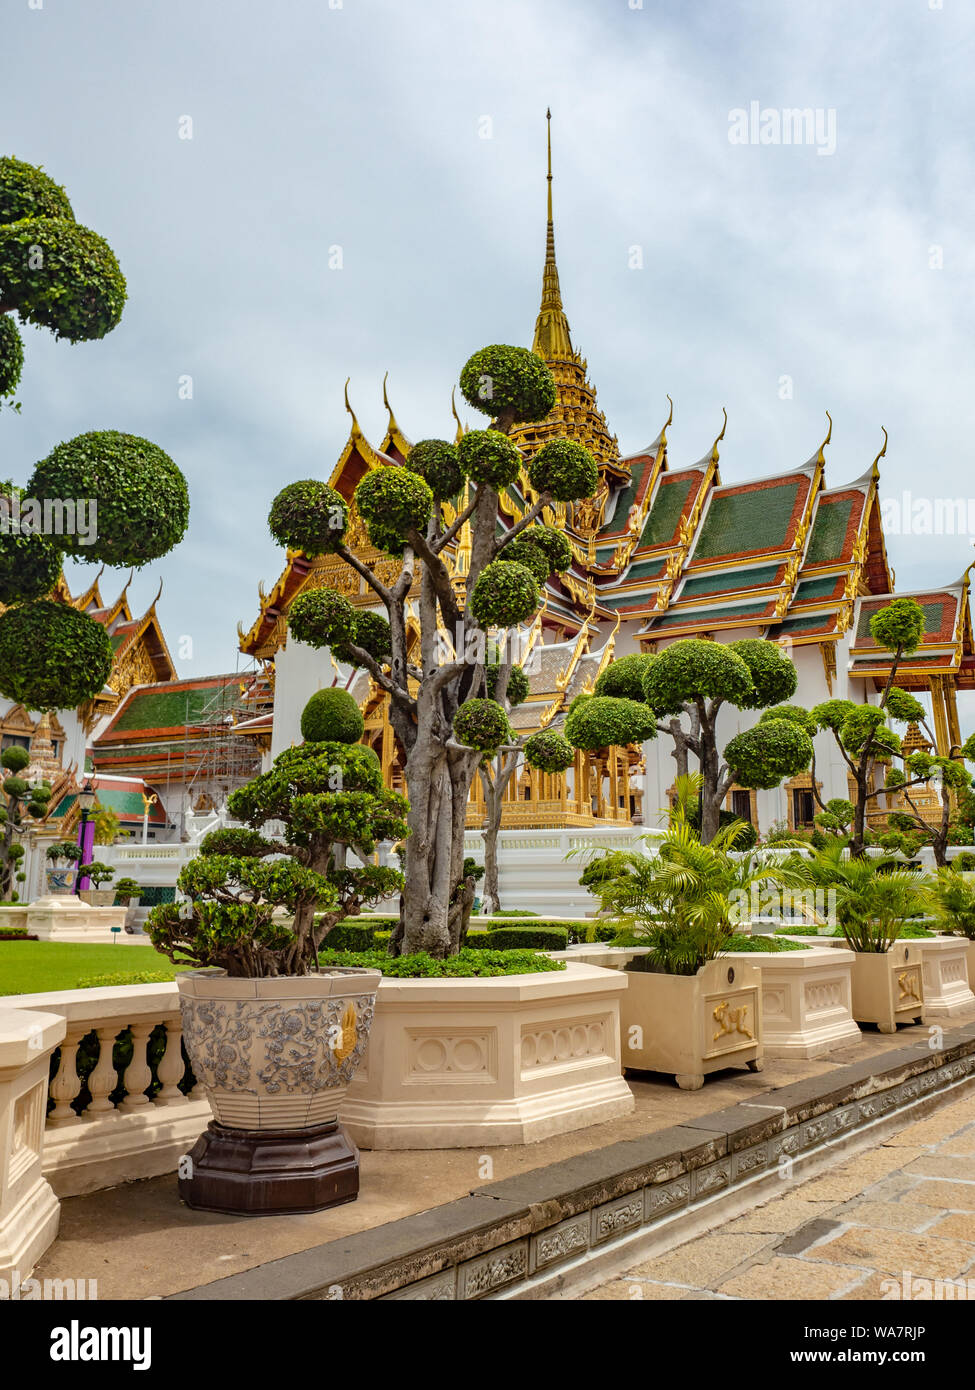 Buidling of Wat Phra Kaew, Grand Palace, Bangkok (Krung Thep), Thailand, Asia. Temple of the Emerald Buddha is the most important Buddhist temple Stock Photo